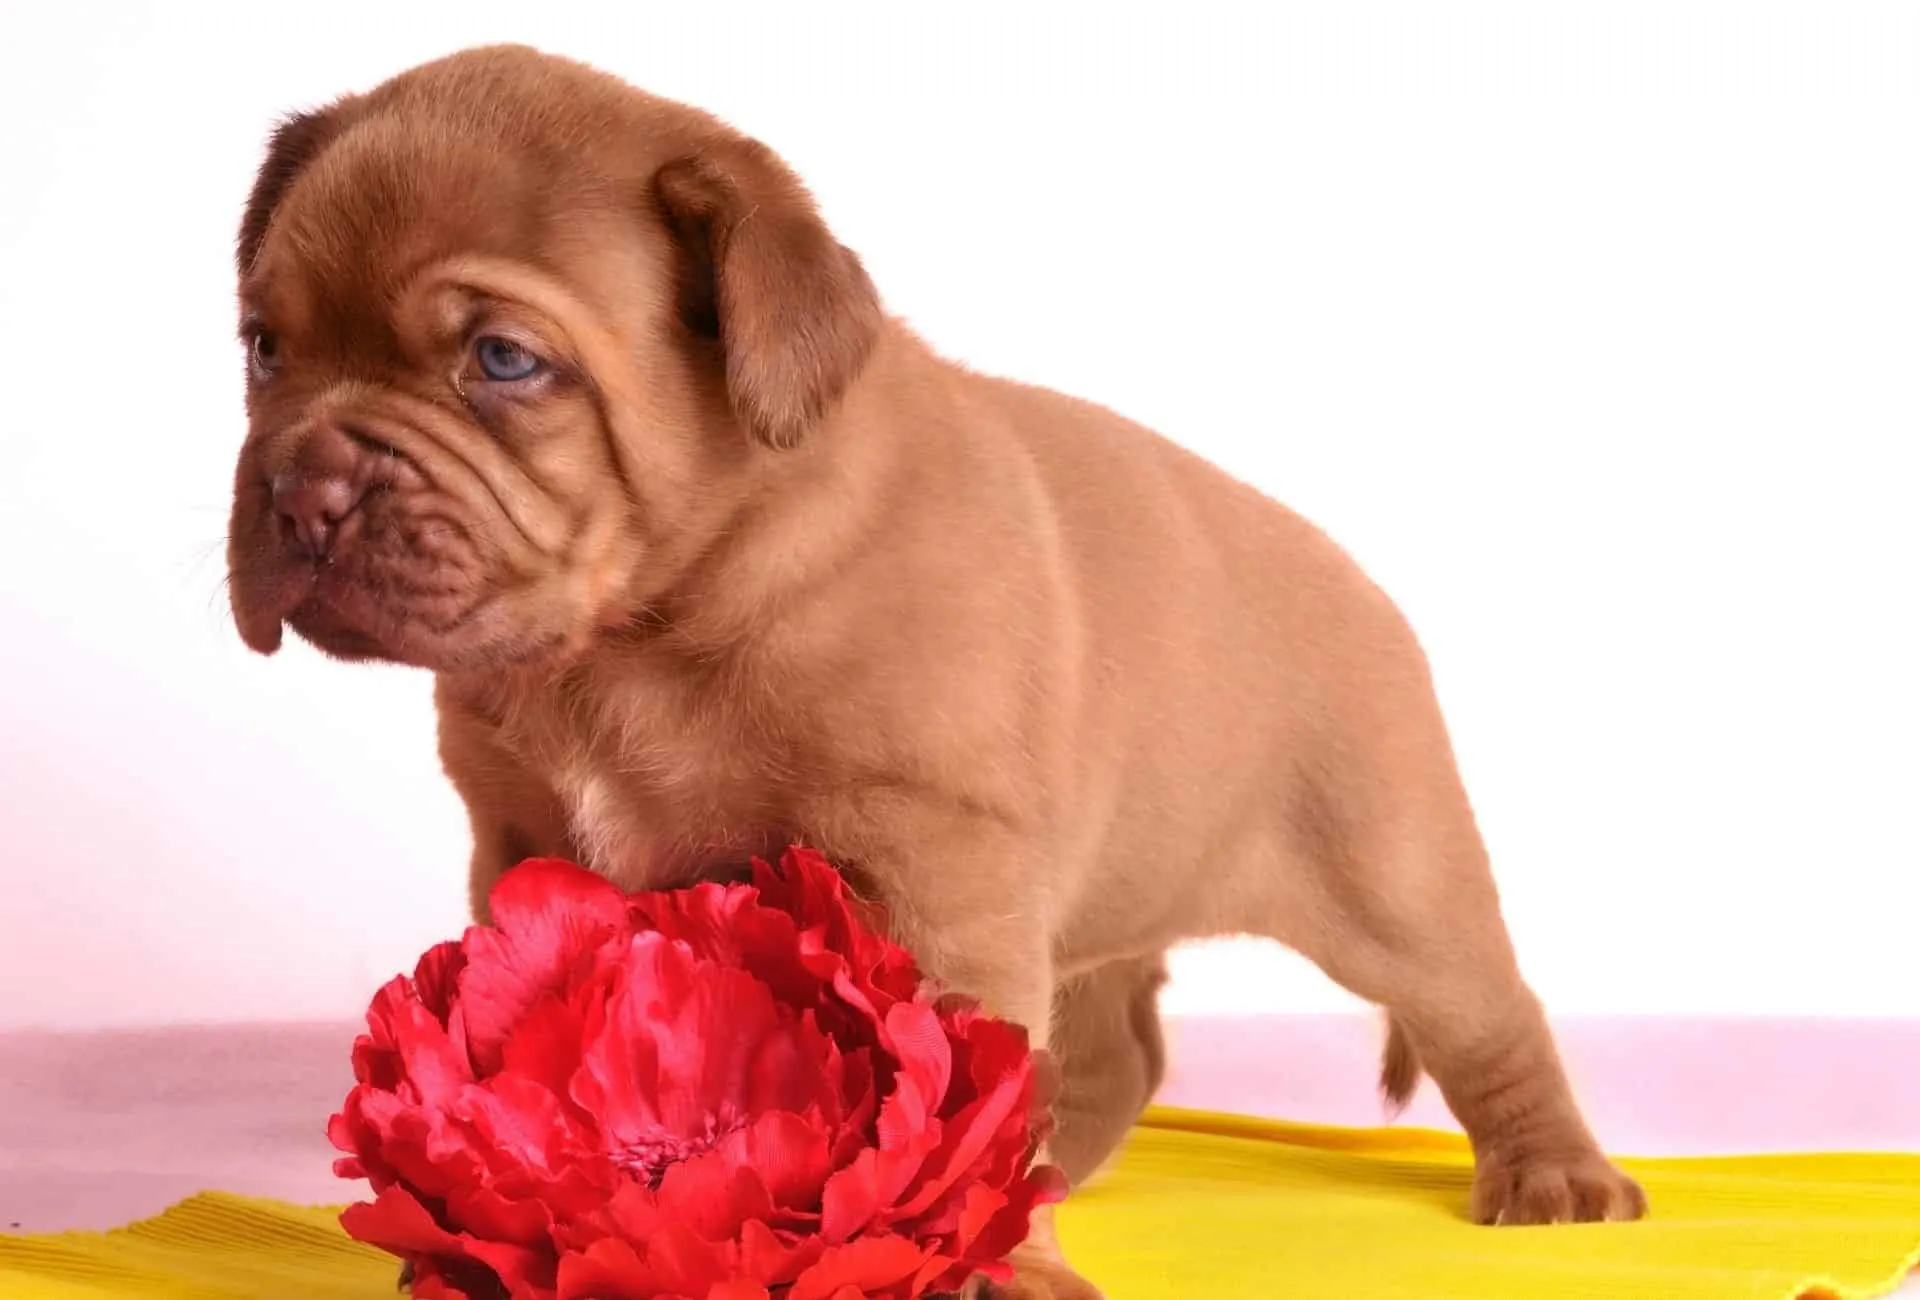 Sweet Dogue De Bordeaux puppy with blue eyes.